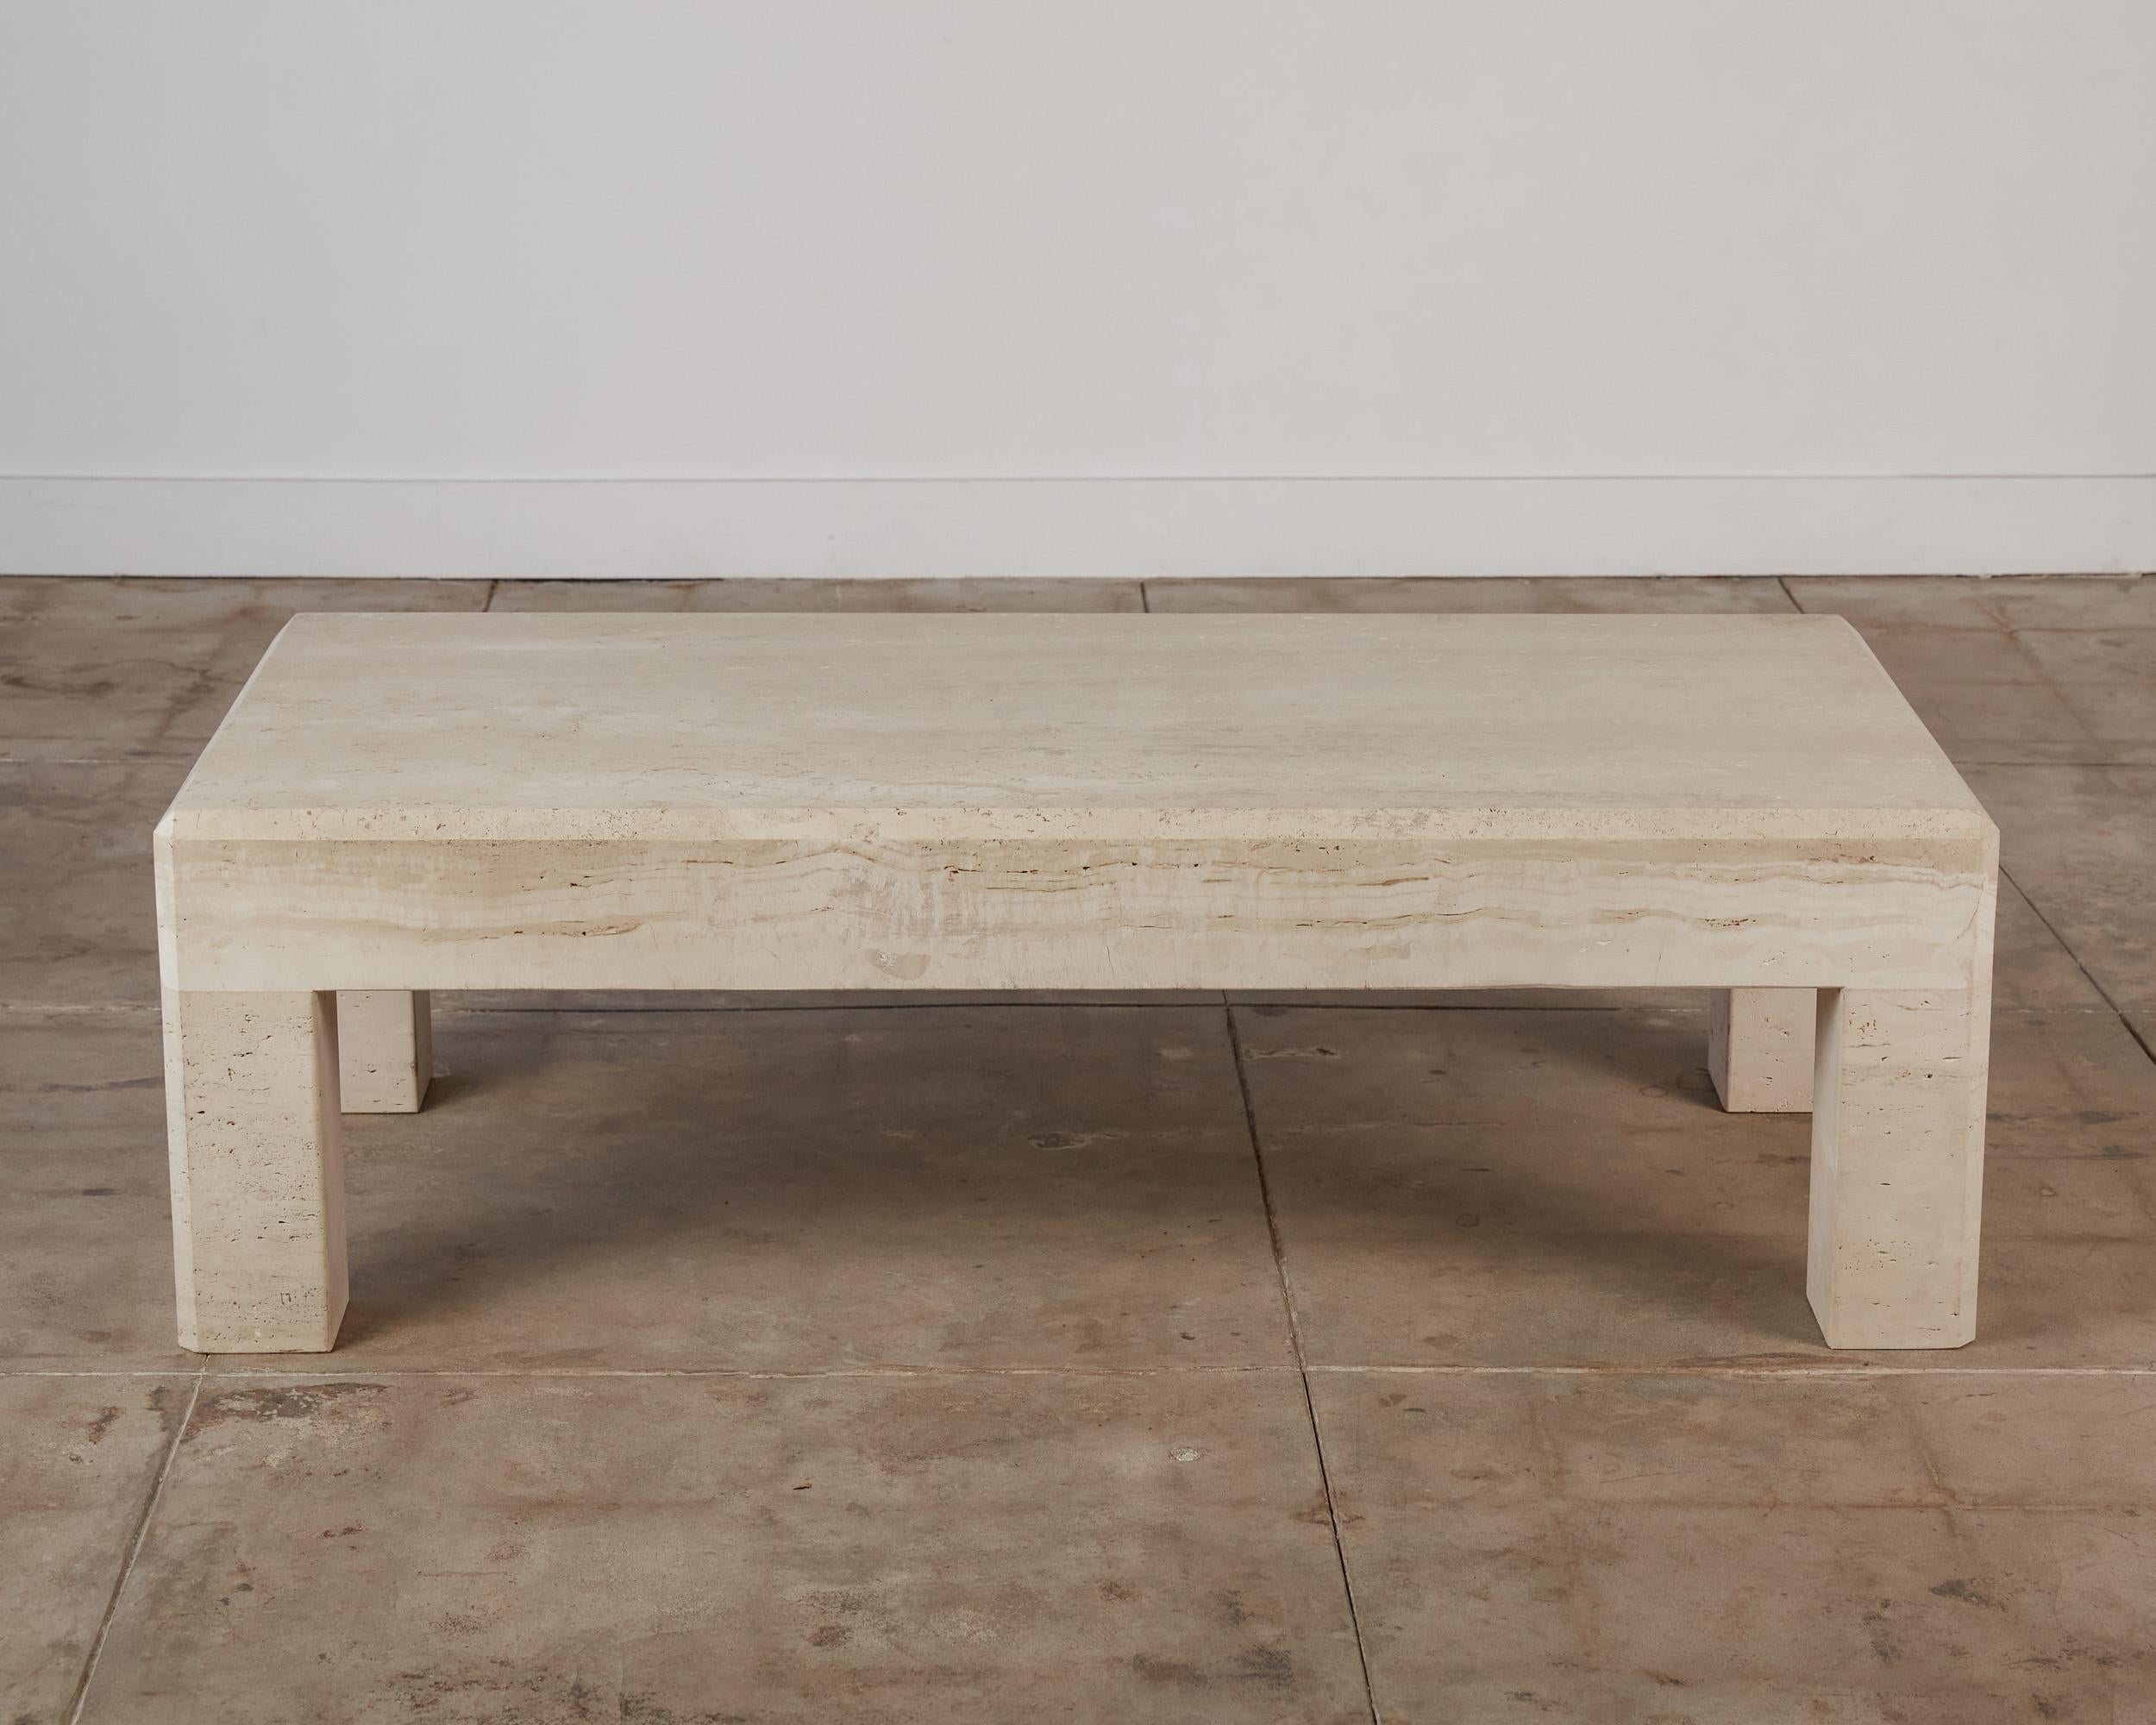 Postmodern travertine coffee table, Italy, c.1980s. This rectangular table has a thick travertine top, that sits atop four square column legs, featuring a chamfered edge detail. With a sleek shape that is reminiscent of tables designed by Italian